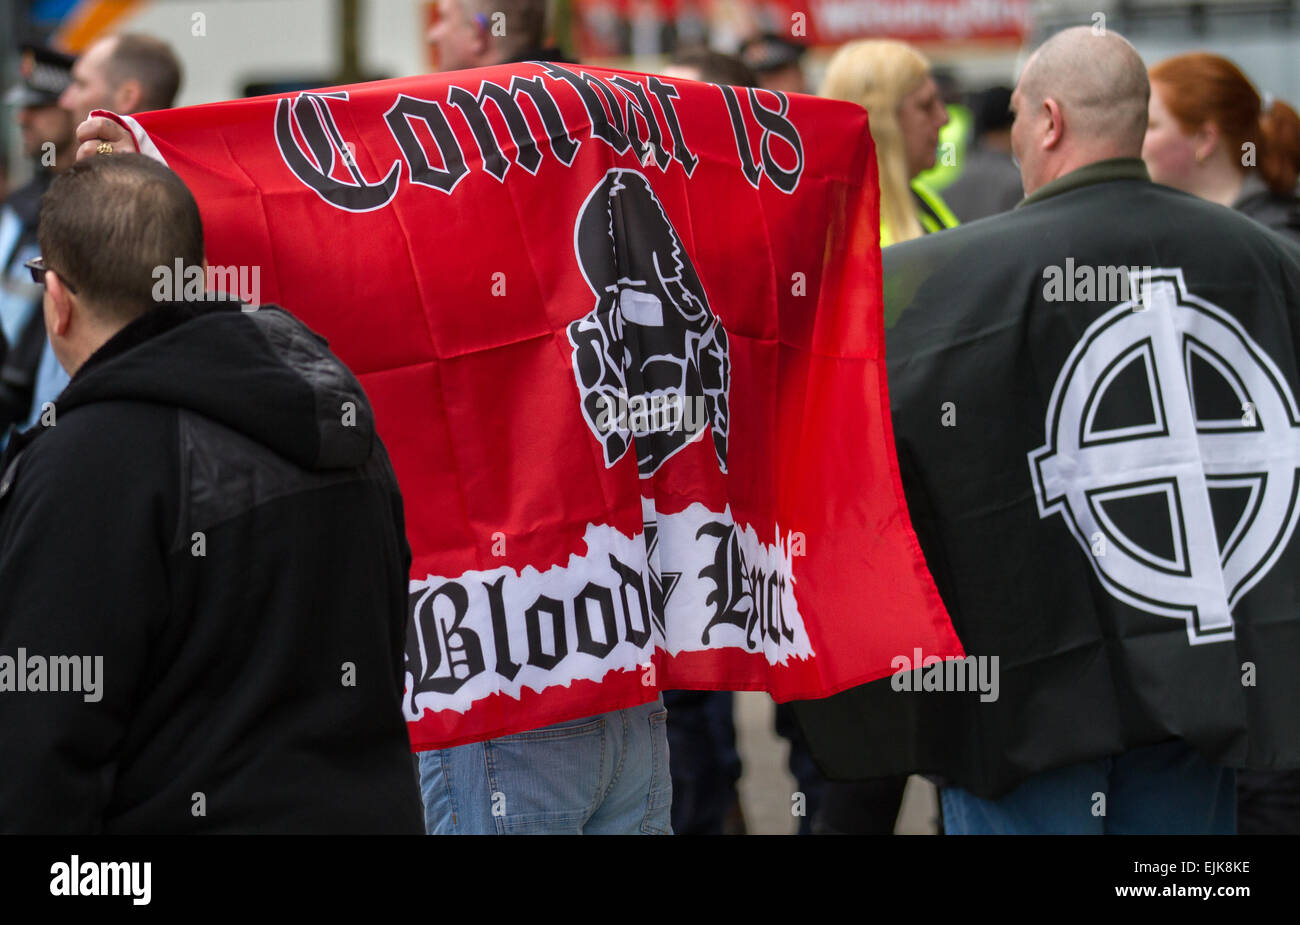 Combat 18 Blood & Honour right-wing extremist political group red banner in Manchester, UK March, 2015. Demonstrators at the National Front and White Pride Demo in Piccadilly.  Arrests were made as Far Right 'White Pride' group gathered in Manchester to stage a demonstration when about 50 members of the group waved flags and marched through Piccadilly Gardens. Anti-fascist campaigners staged a counter-demonstration and police line separated the two sides. Greater Manchester Police said two arrests were made, one for a breach of the peace. Stock Photo